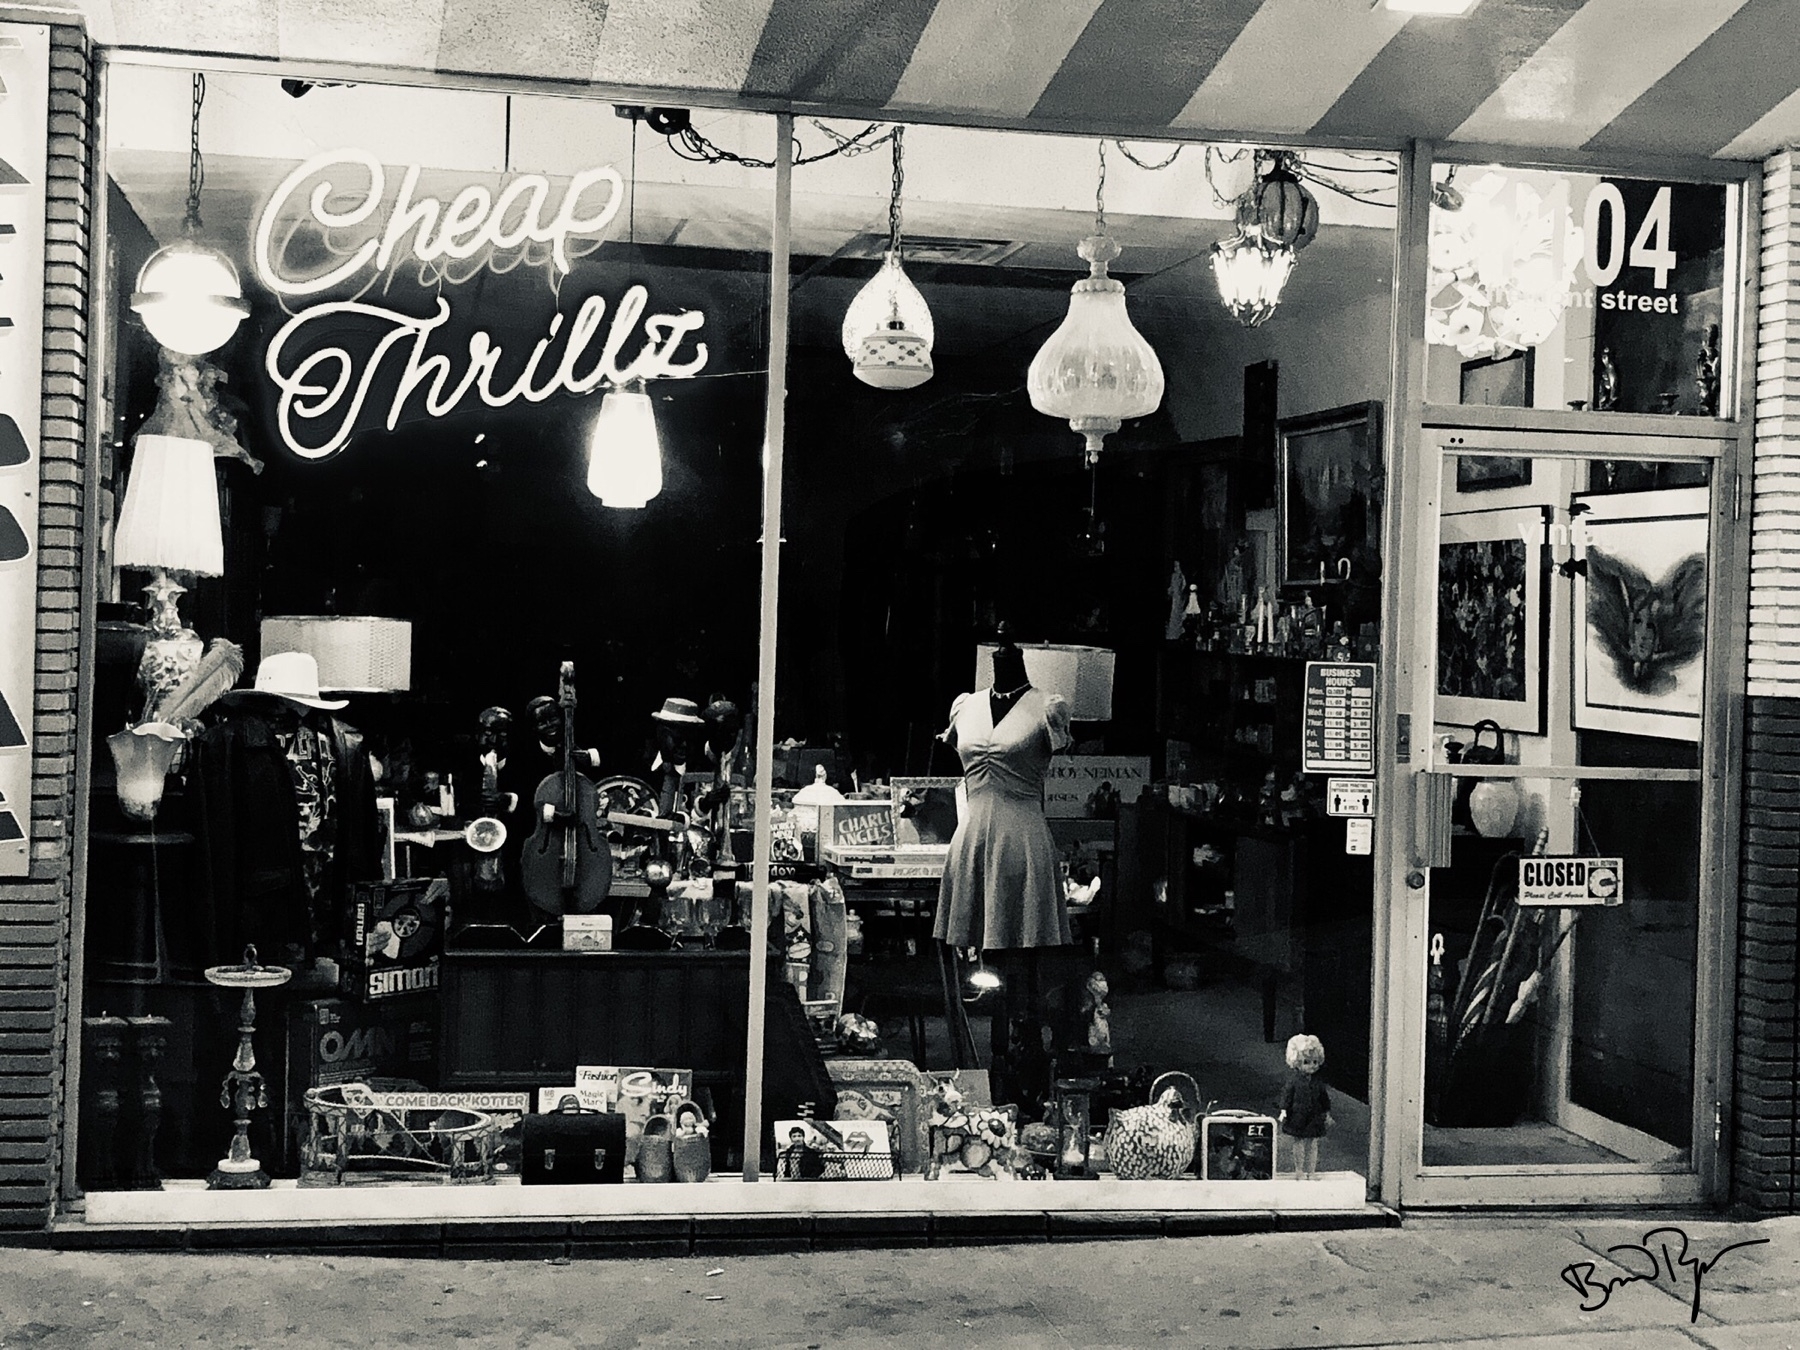 Store front, night, b/w, neon sign, Cheap Thrills